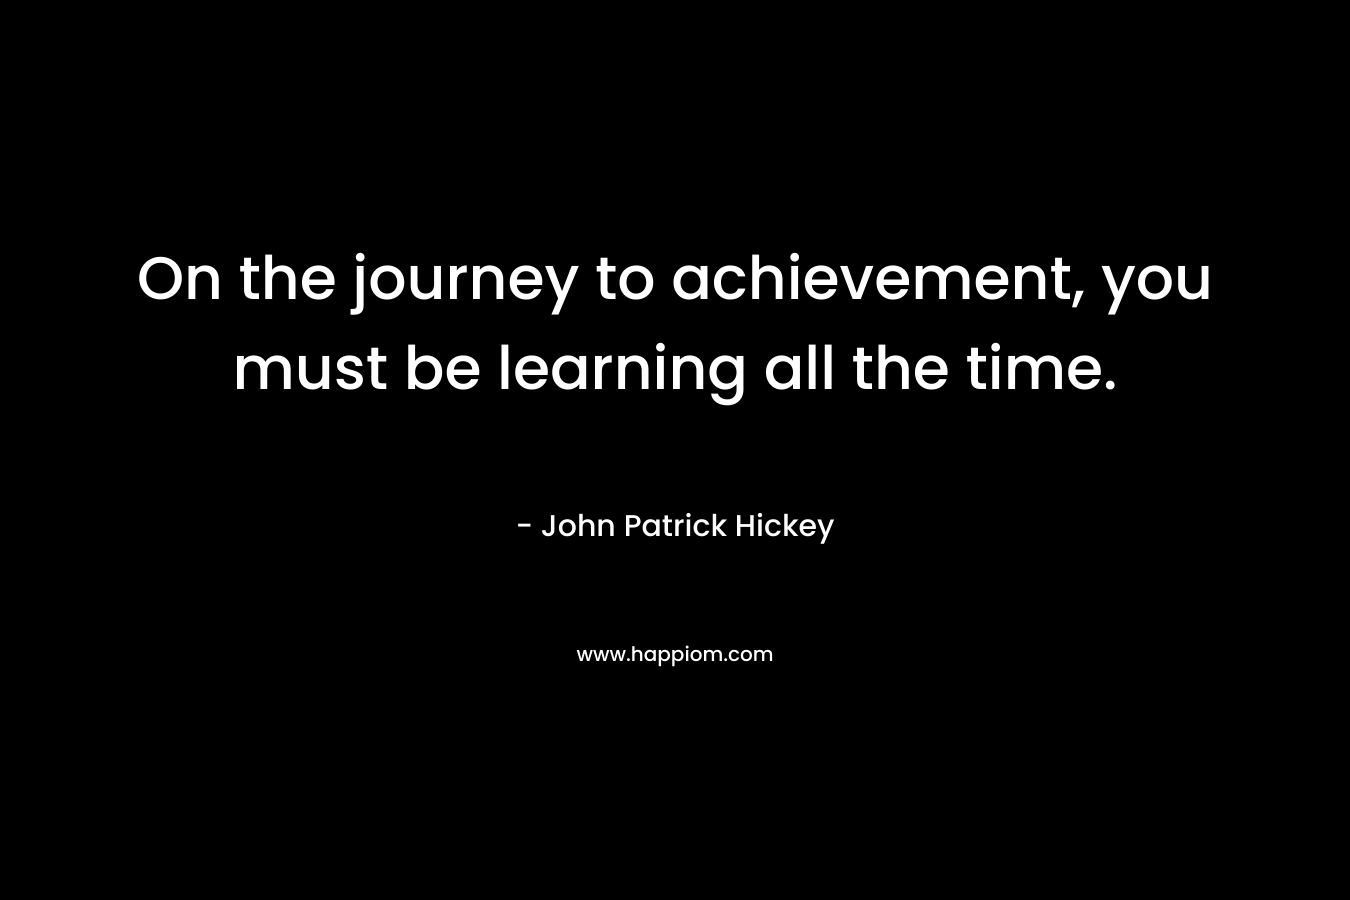 On the journey to achievement, you must be learning all the time.